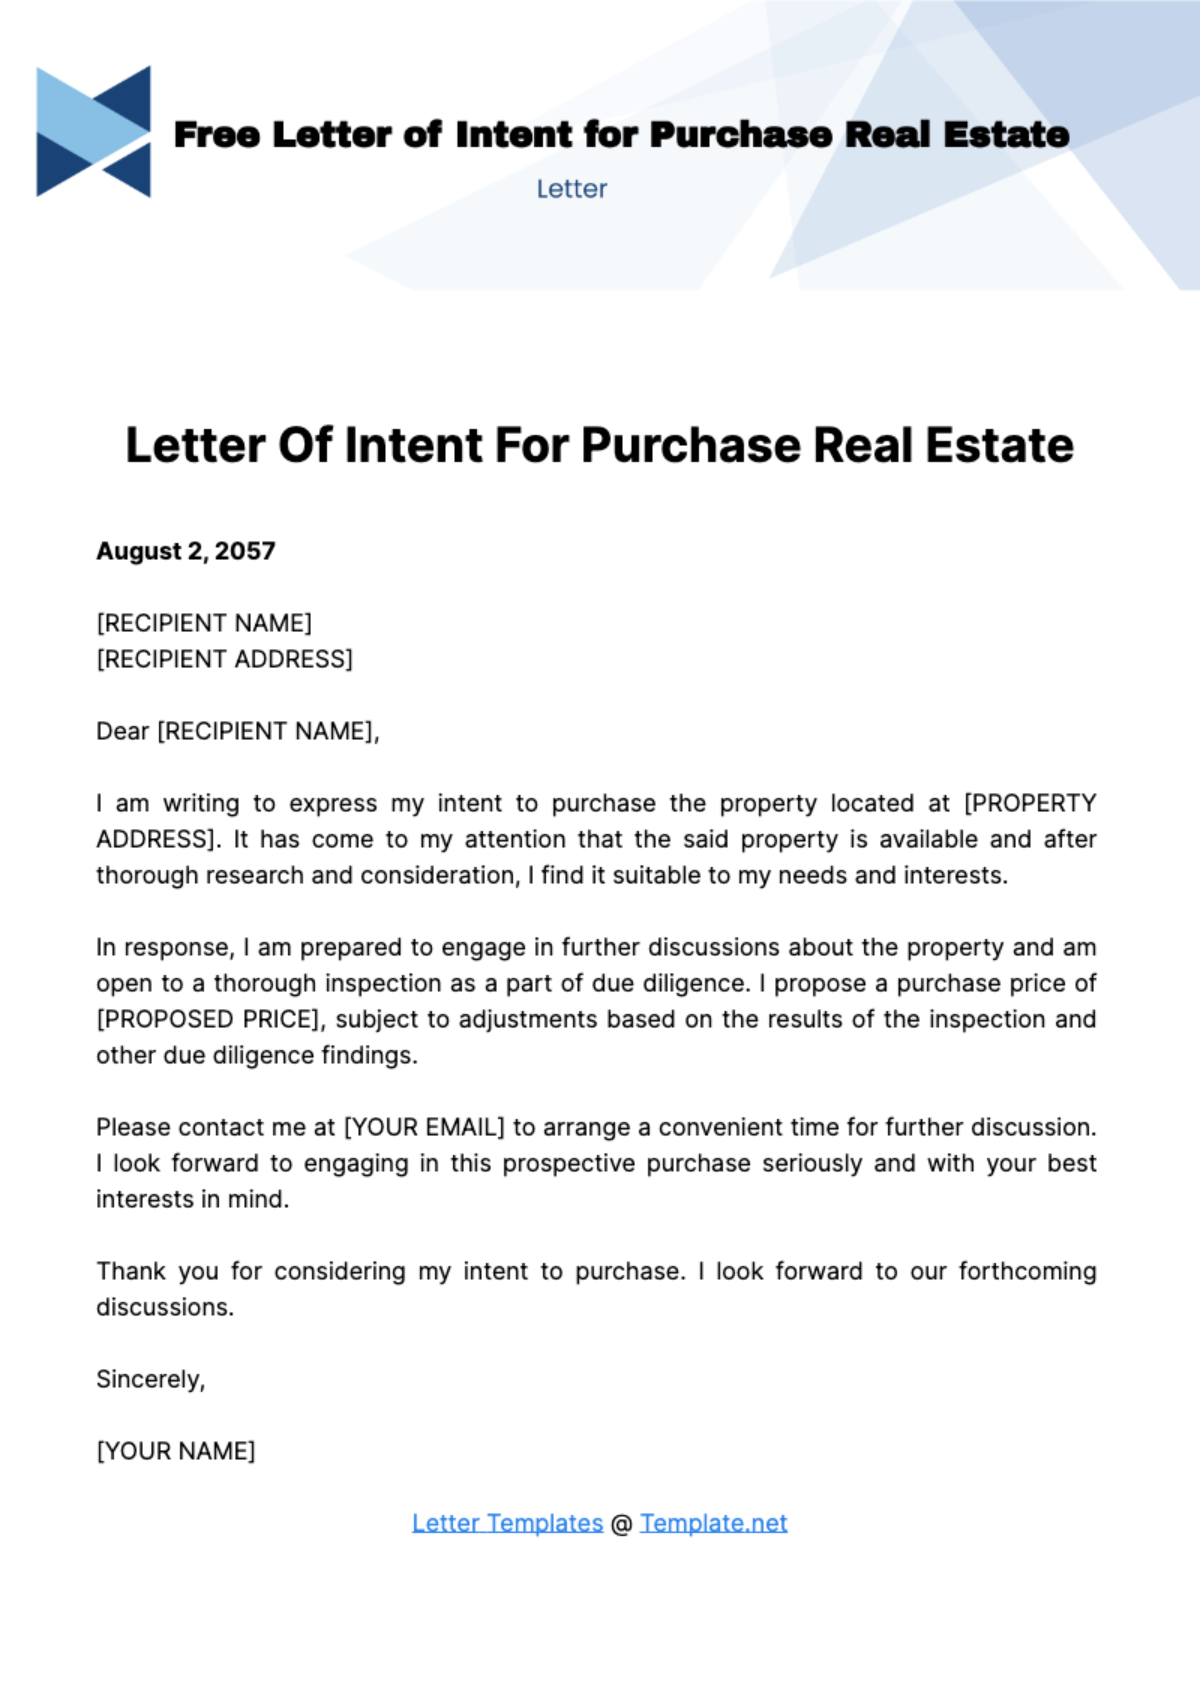 Free Letter of Intent for Purchase Real Estate Template